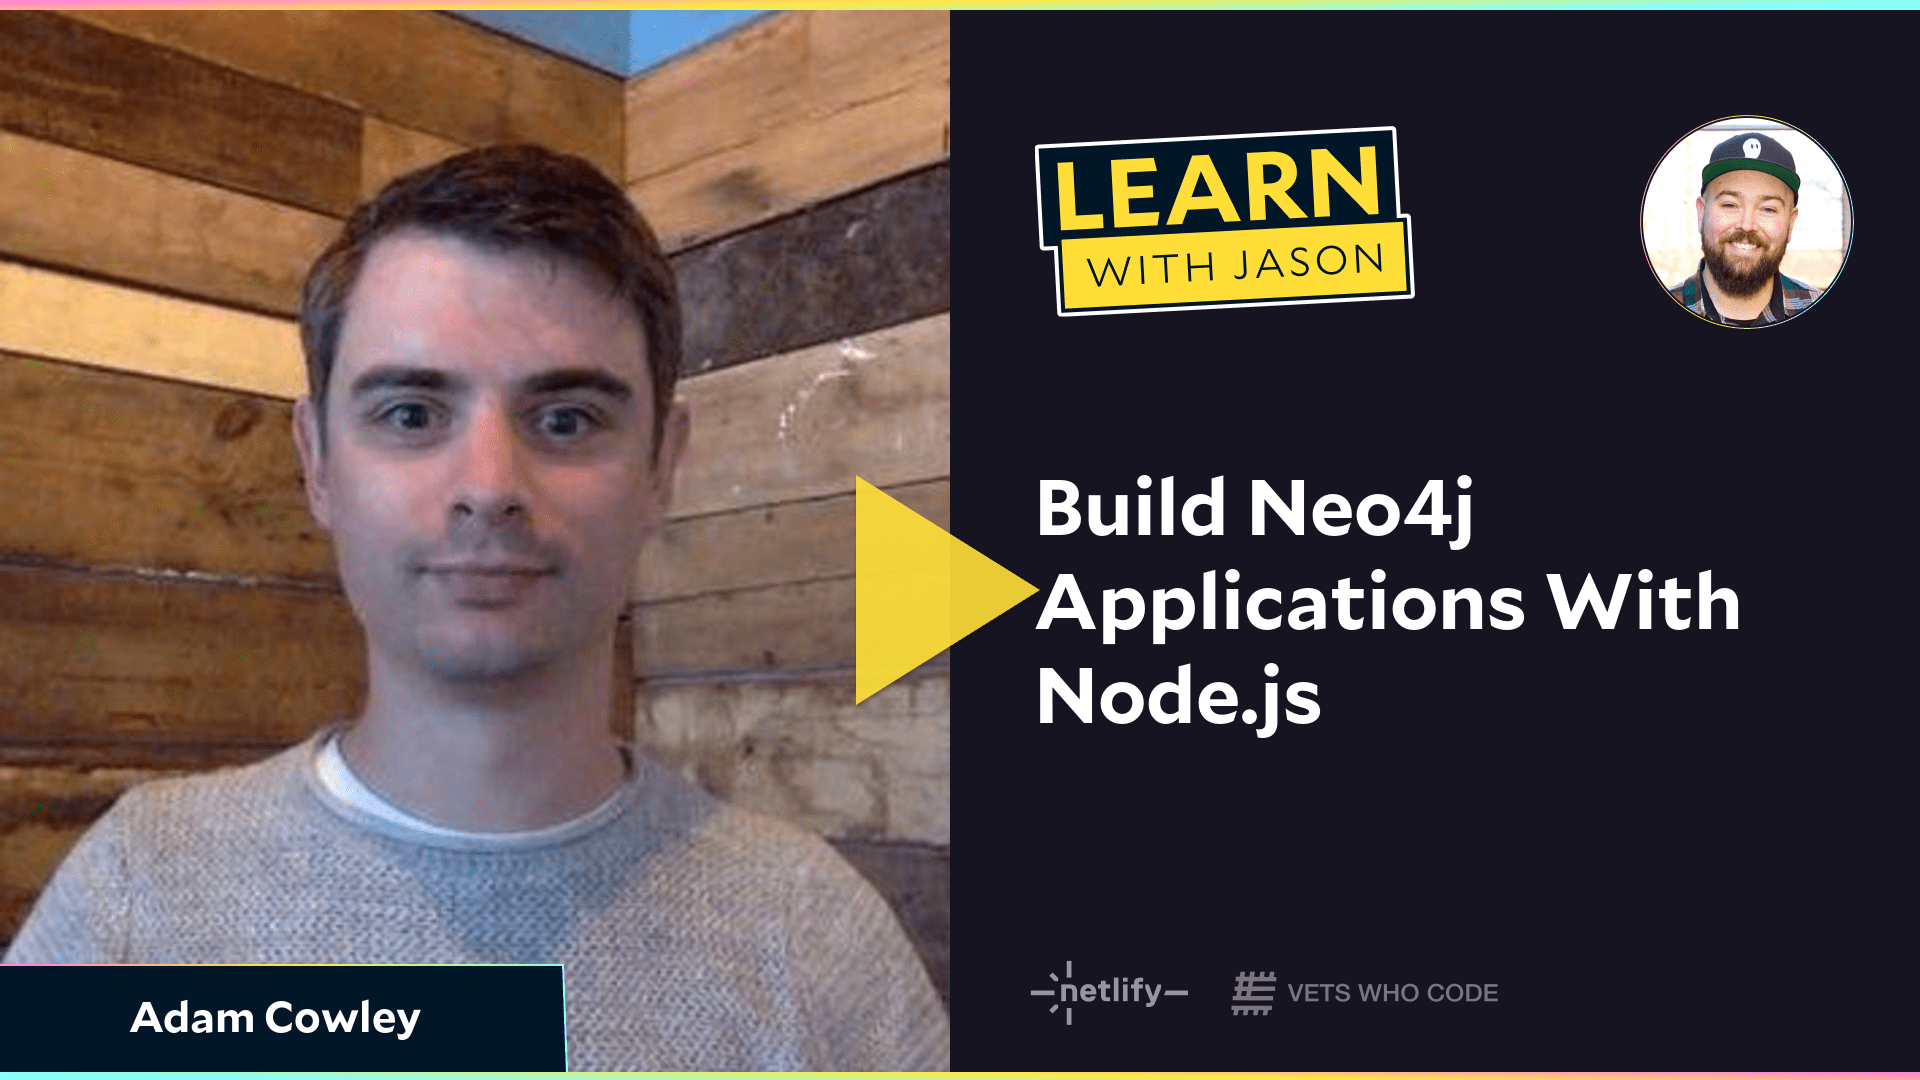 Build Neo4j Applications With Node.js (with Adam Cowley)